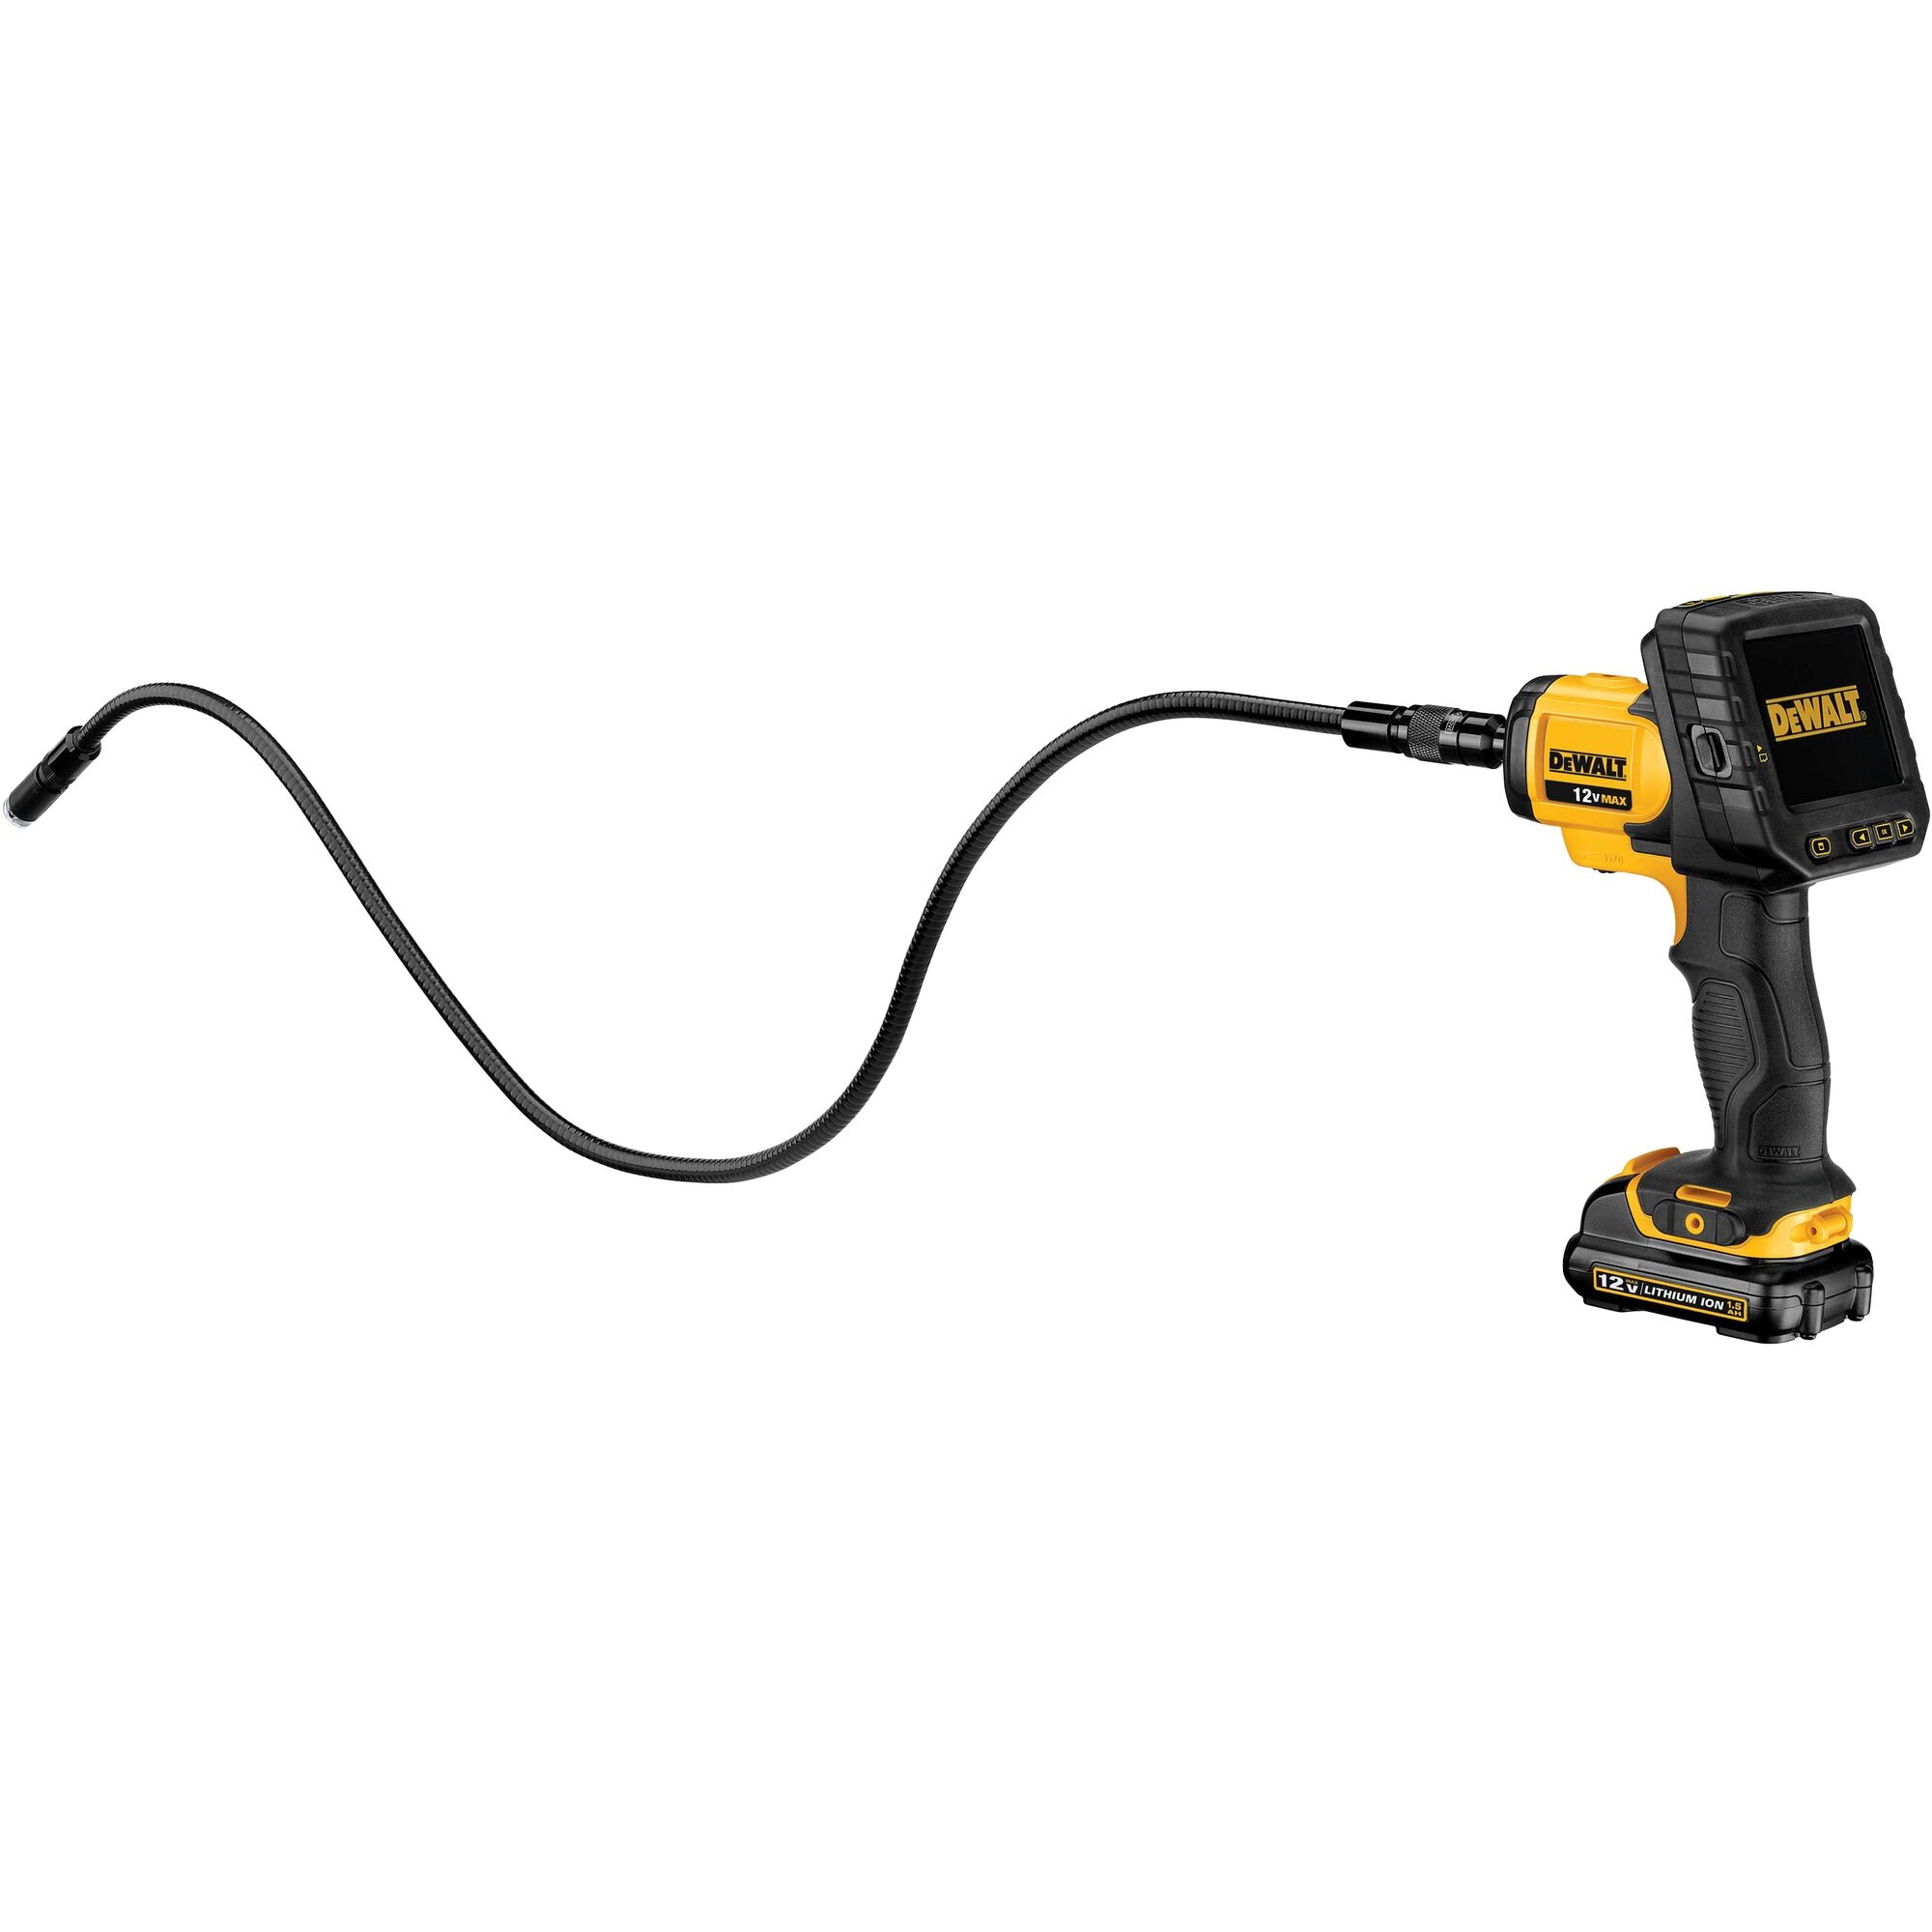 Inspection Cameras - Power Tools - The Home Depot